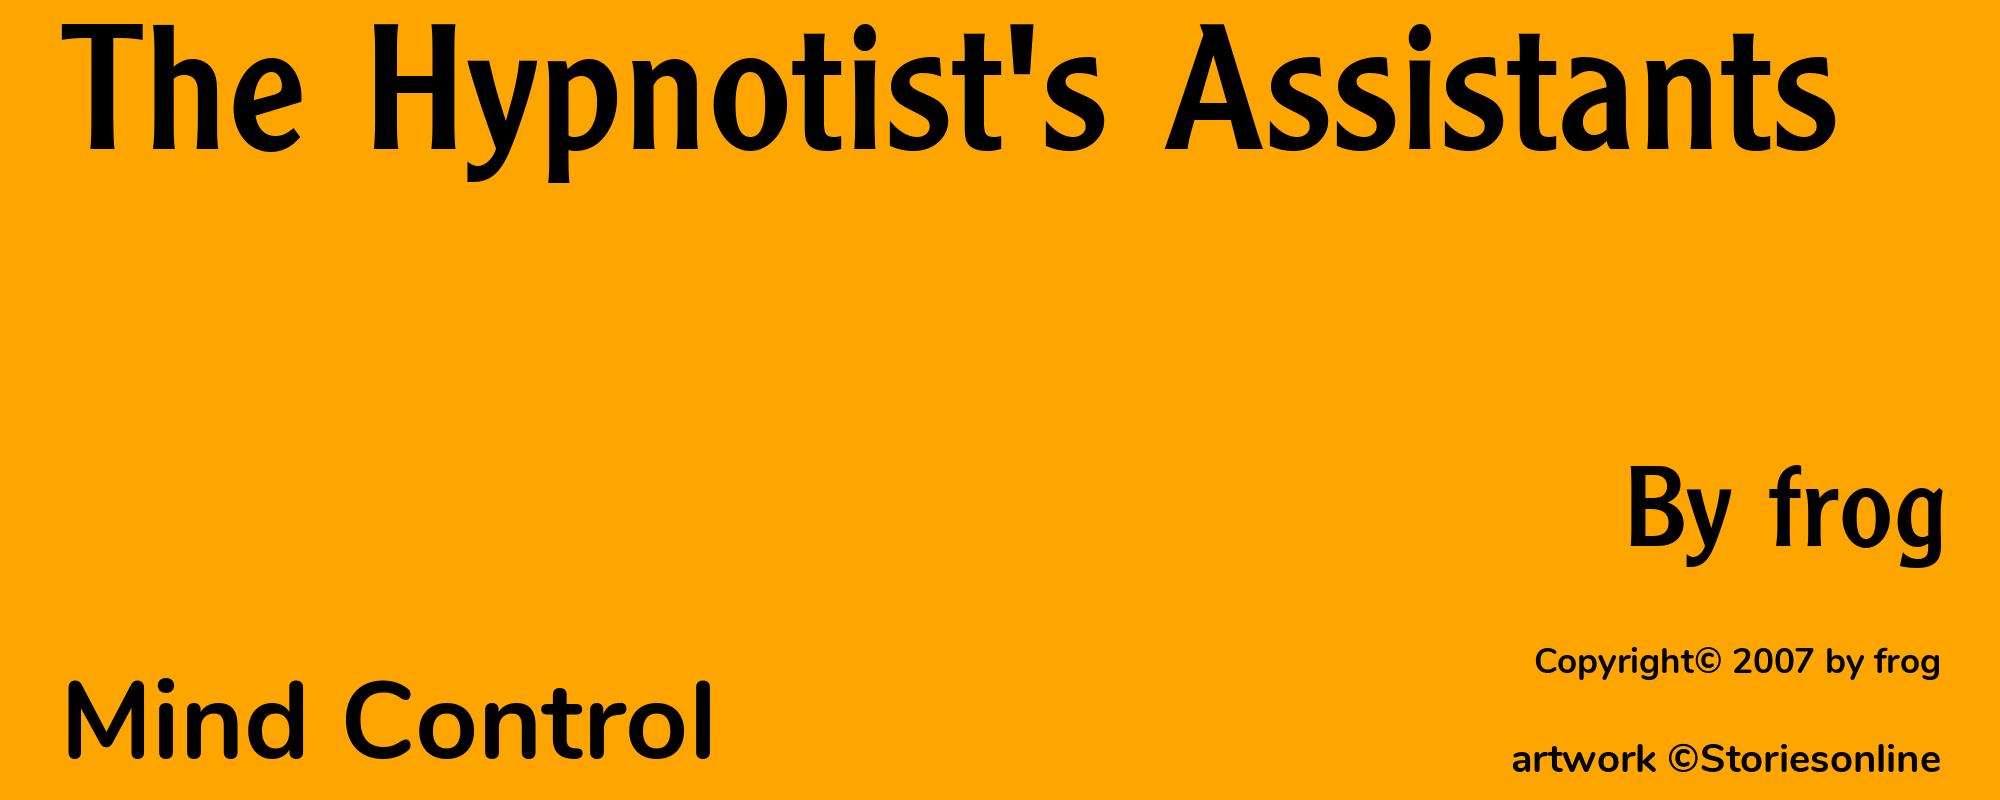 The Hypnotist's Assistants - Cover